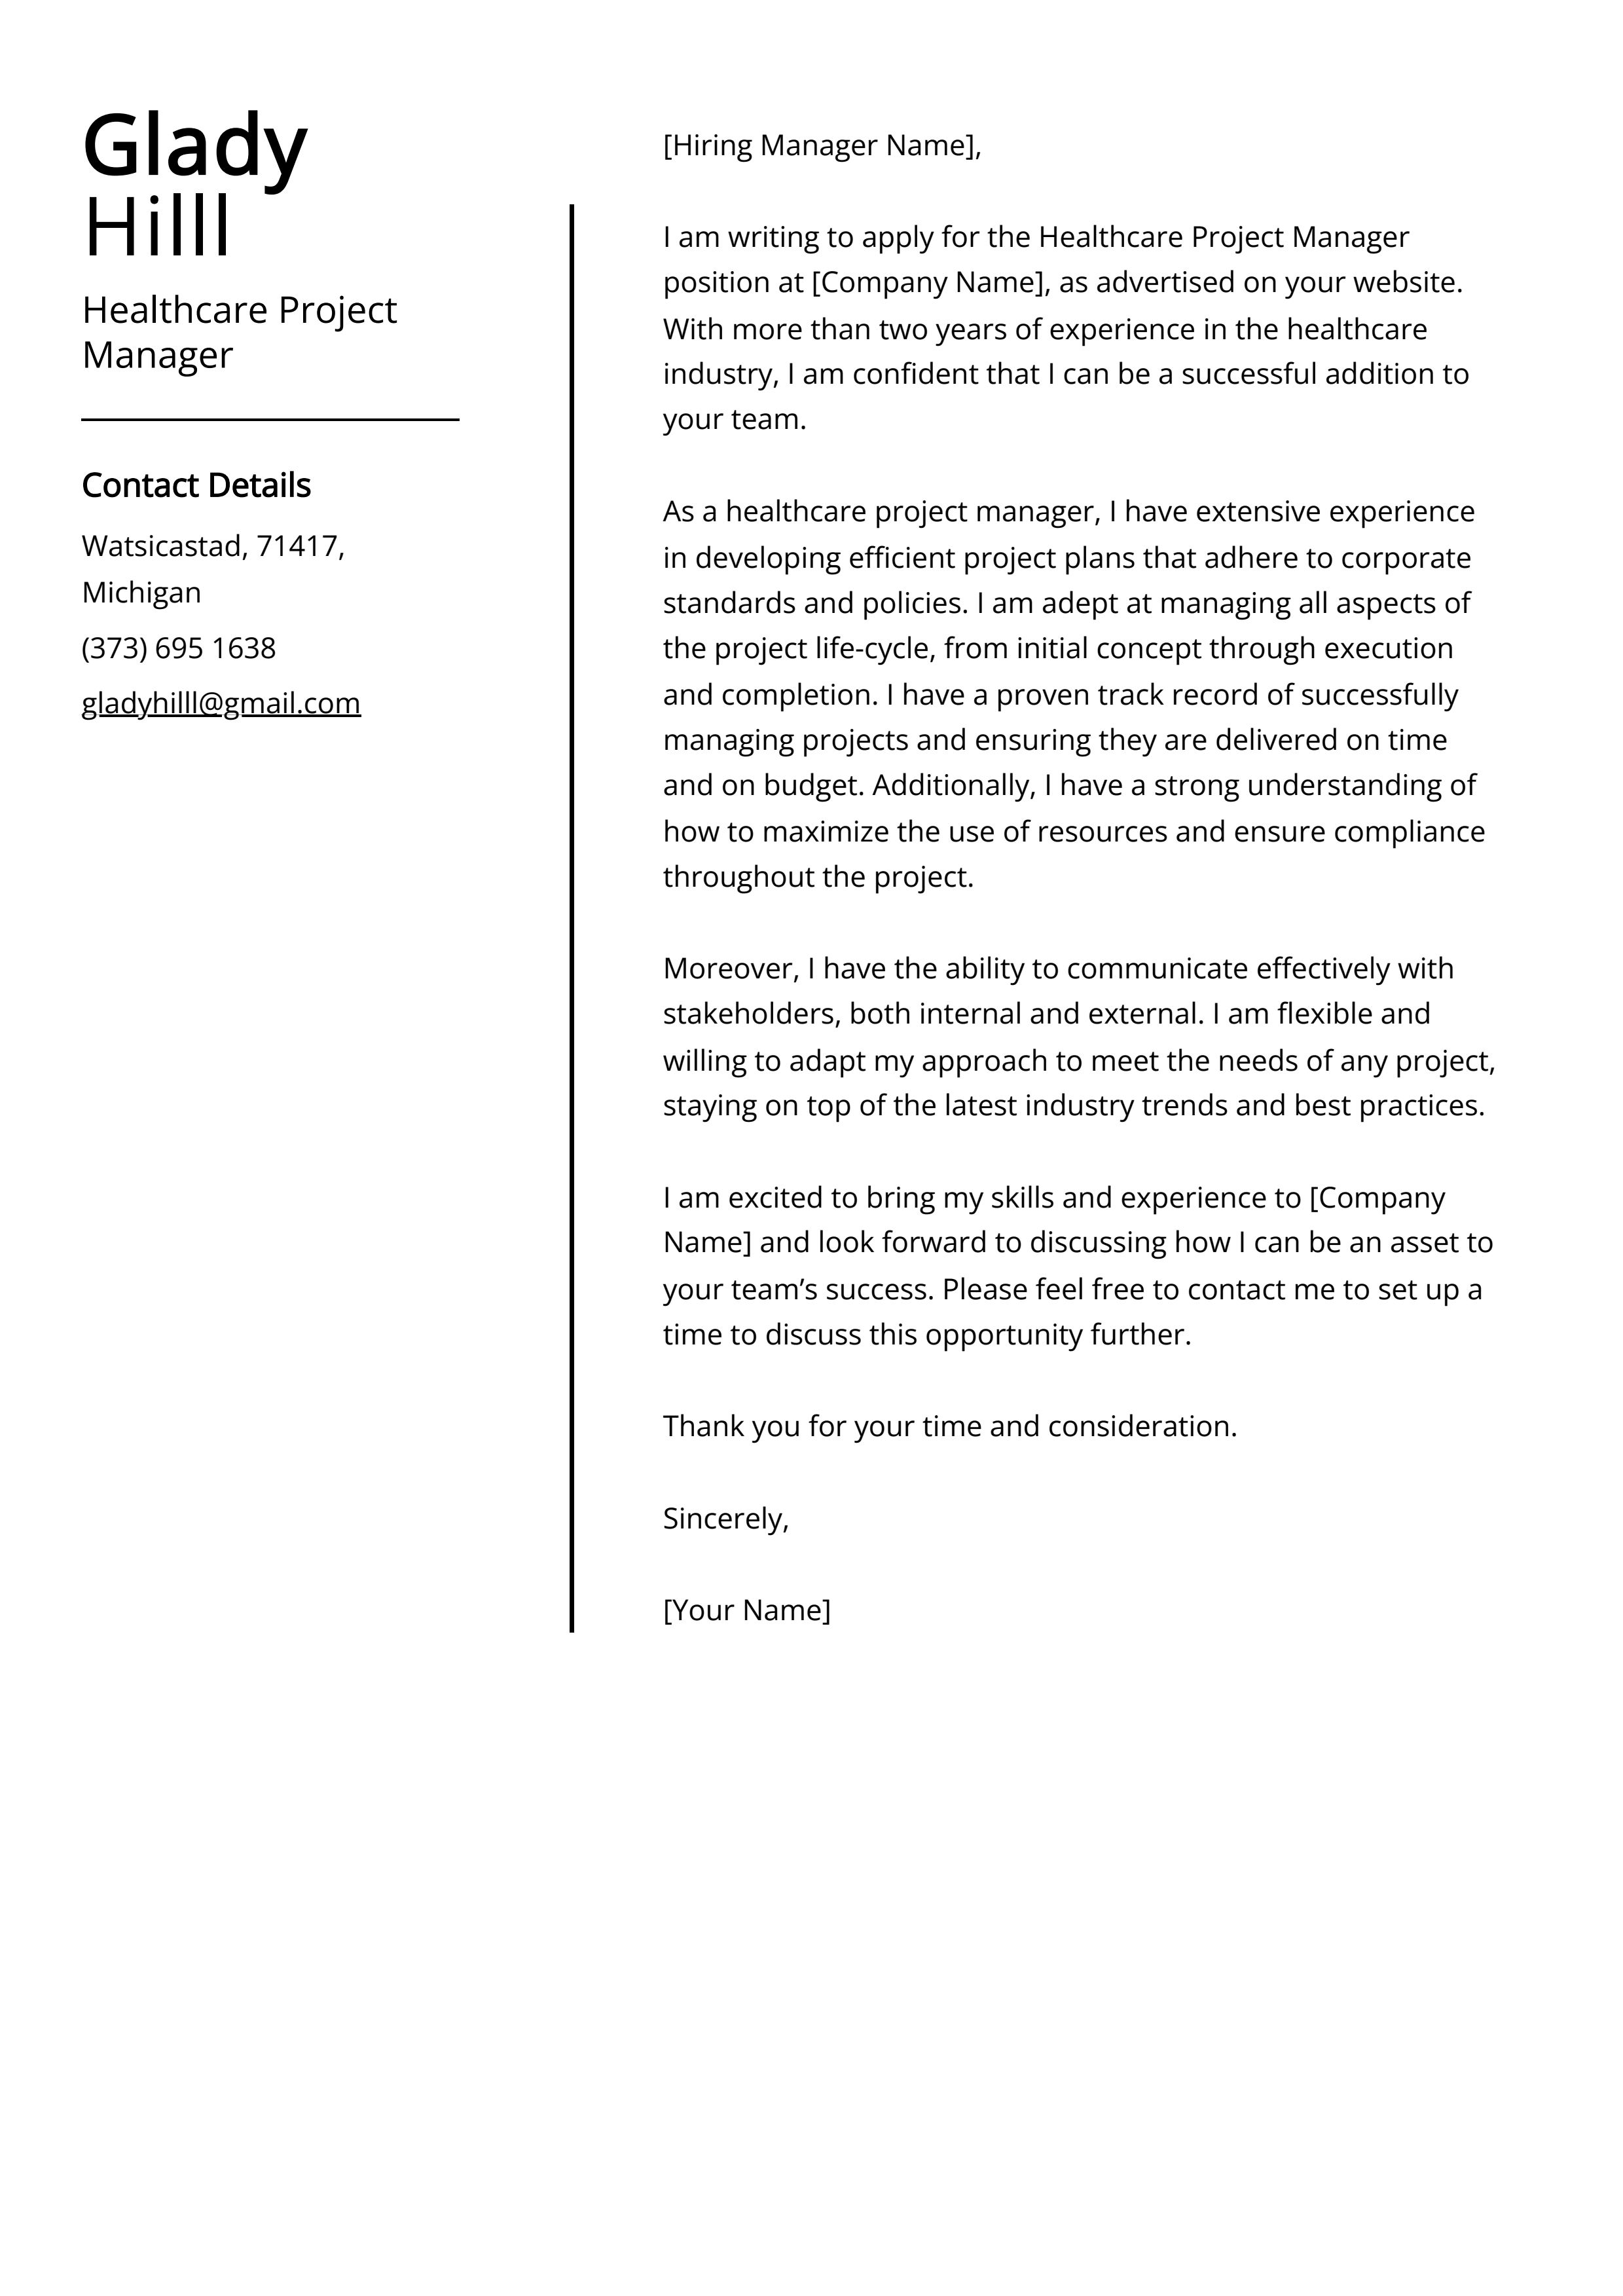 Healthcare Project Manager Cover Letter Example